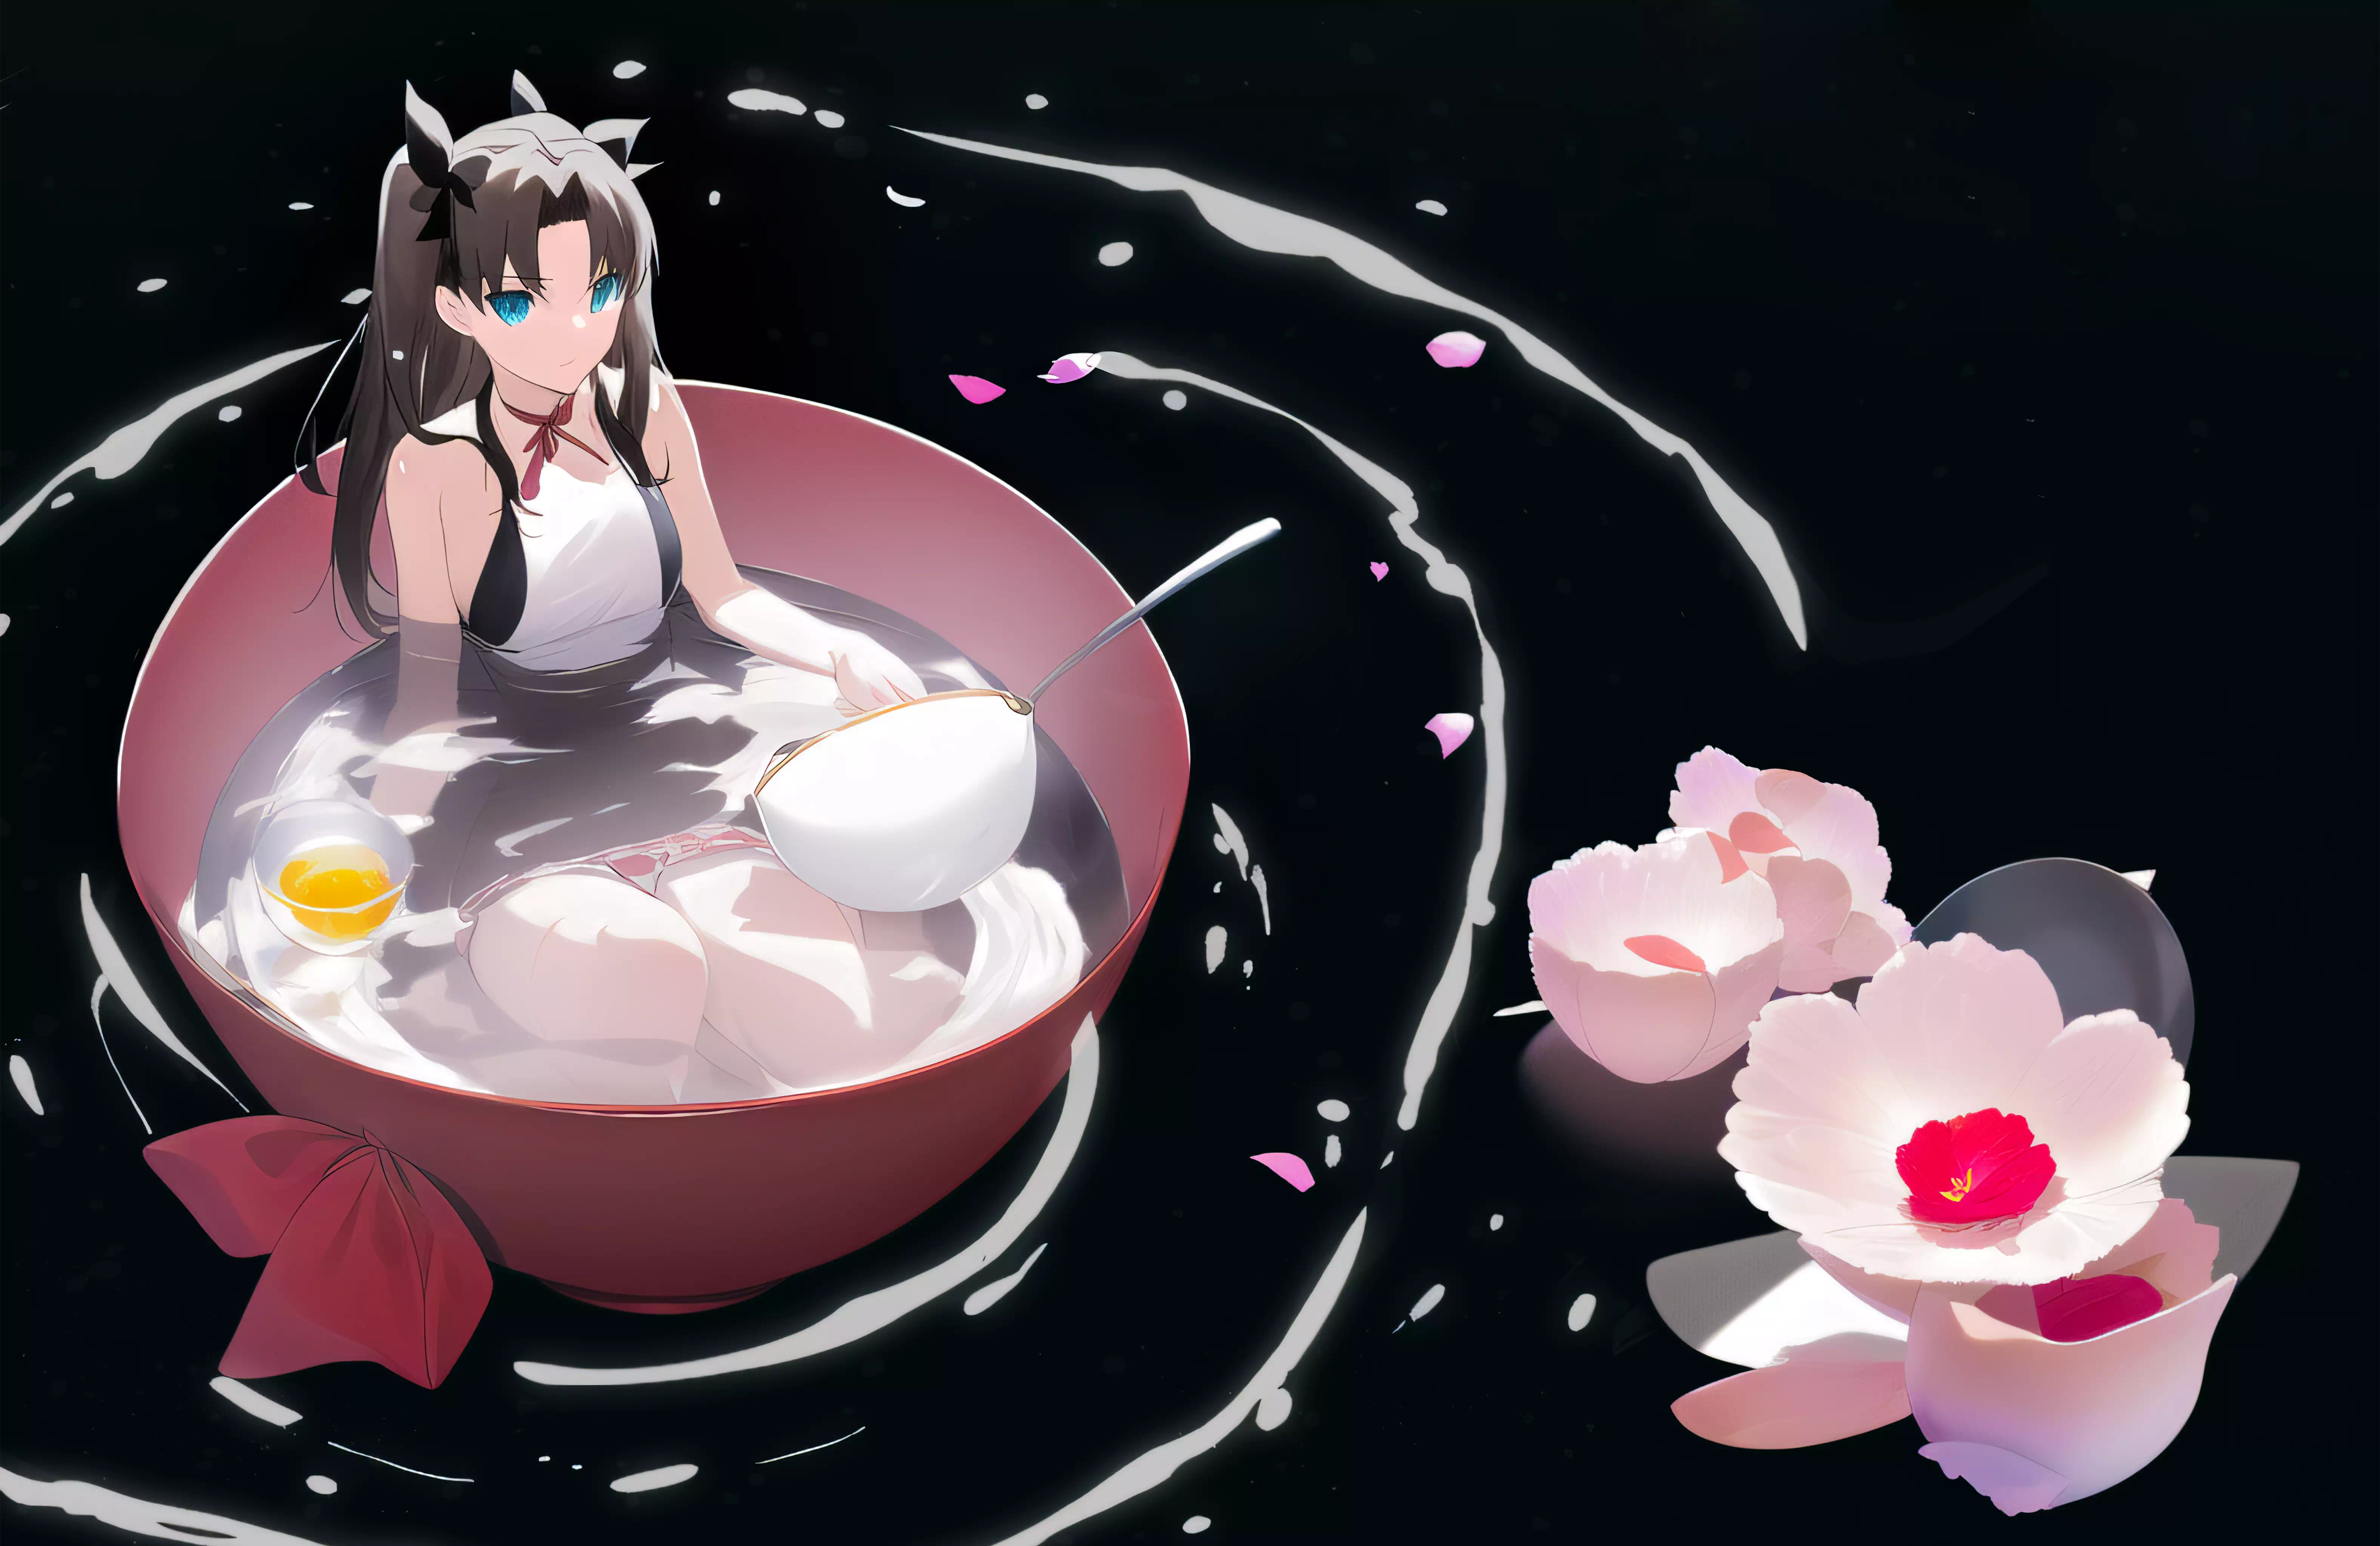 [AI] 遠坂凛 Want a cup of Rin？